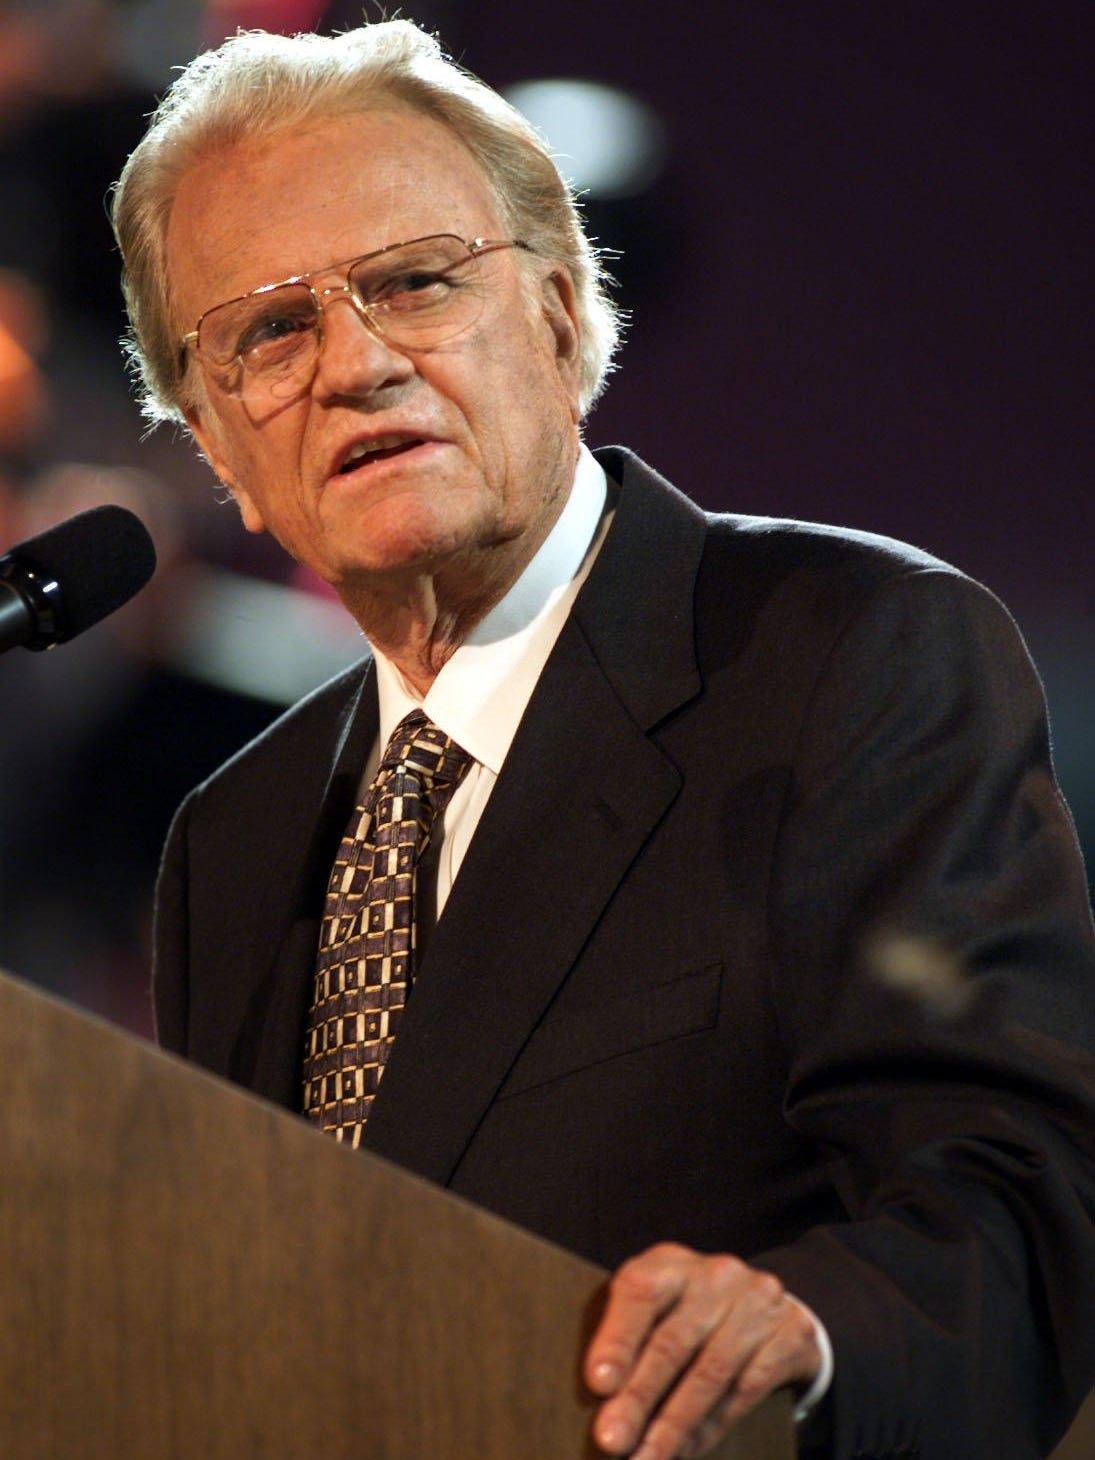 DOWNLOAD MP3 : MESSAGE FOR THE HOPELESS By Evangelist Billy Graham (sermon) 19